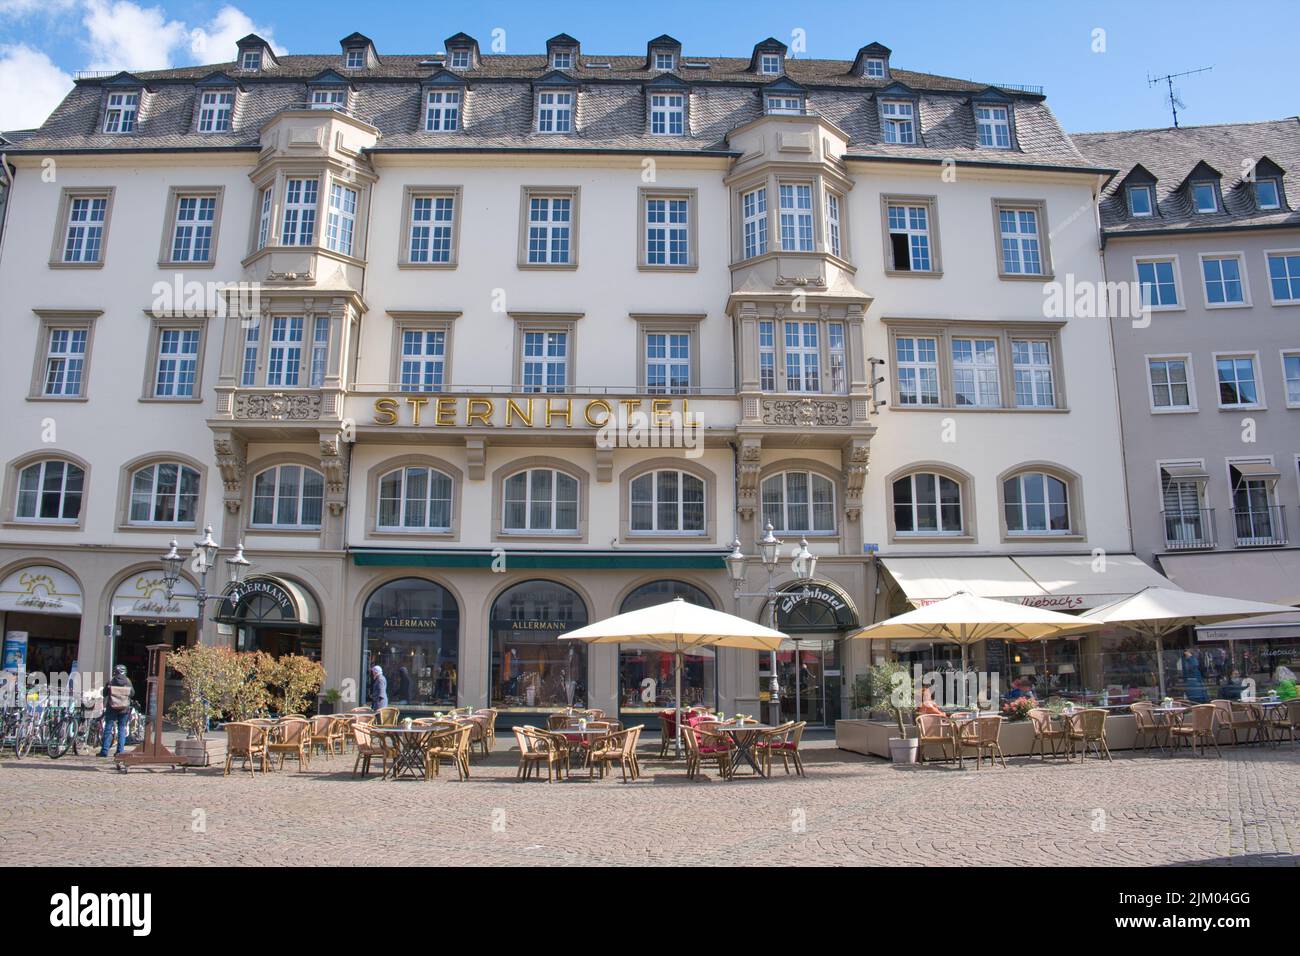 the famous hotel called Sternhotel in the Bonn city next to the market place Stock Photo